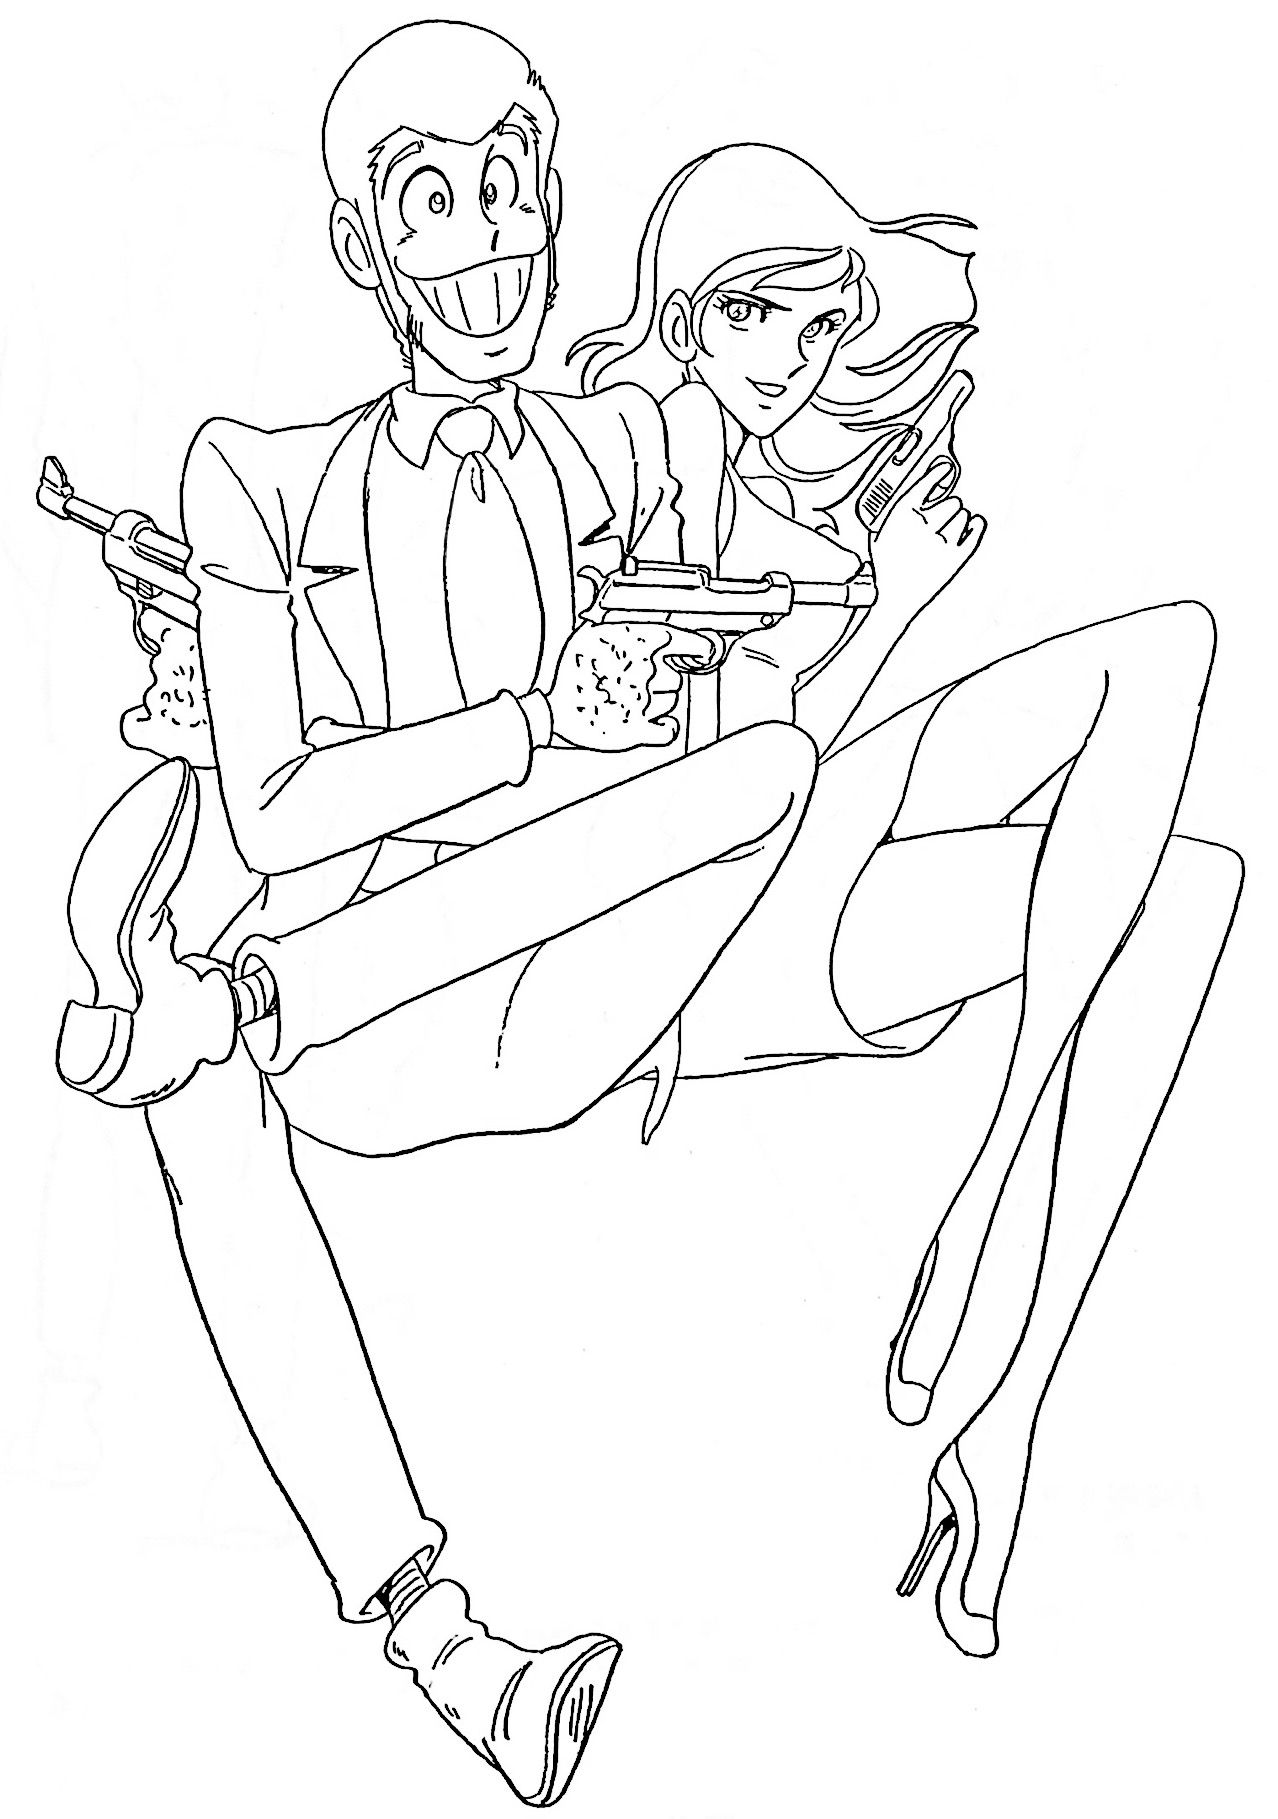 Lupin III Coloring Page